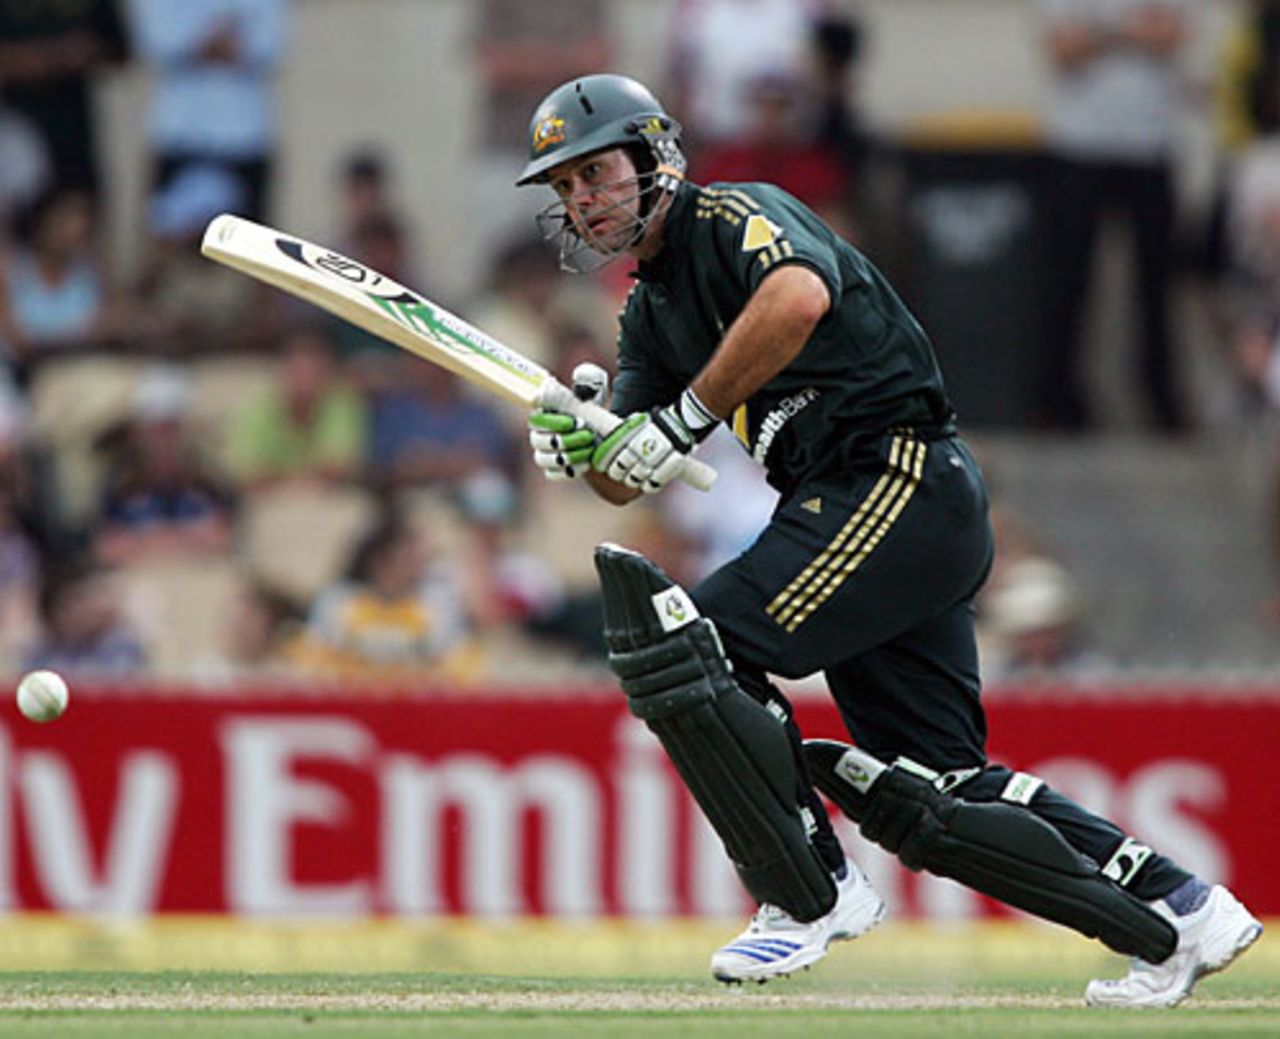 Ricky Ponting remained unbeaten on 107, Australia v New Zealand, 1st ODI, Chappell-Hadlee Trophy, December 14, 2007